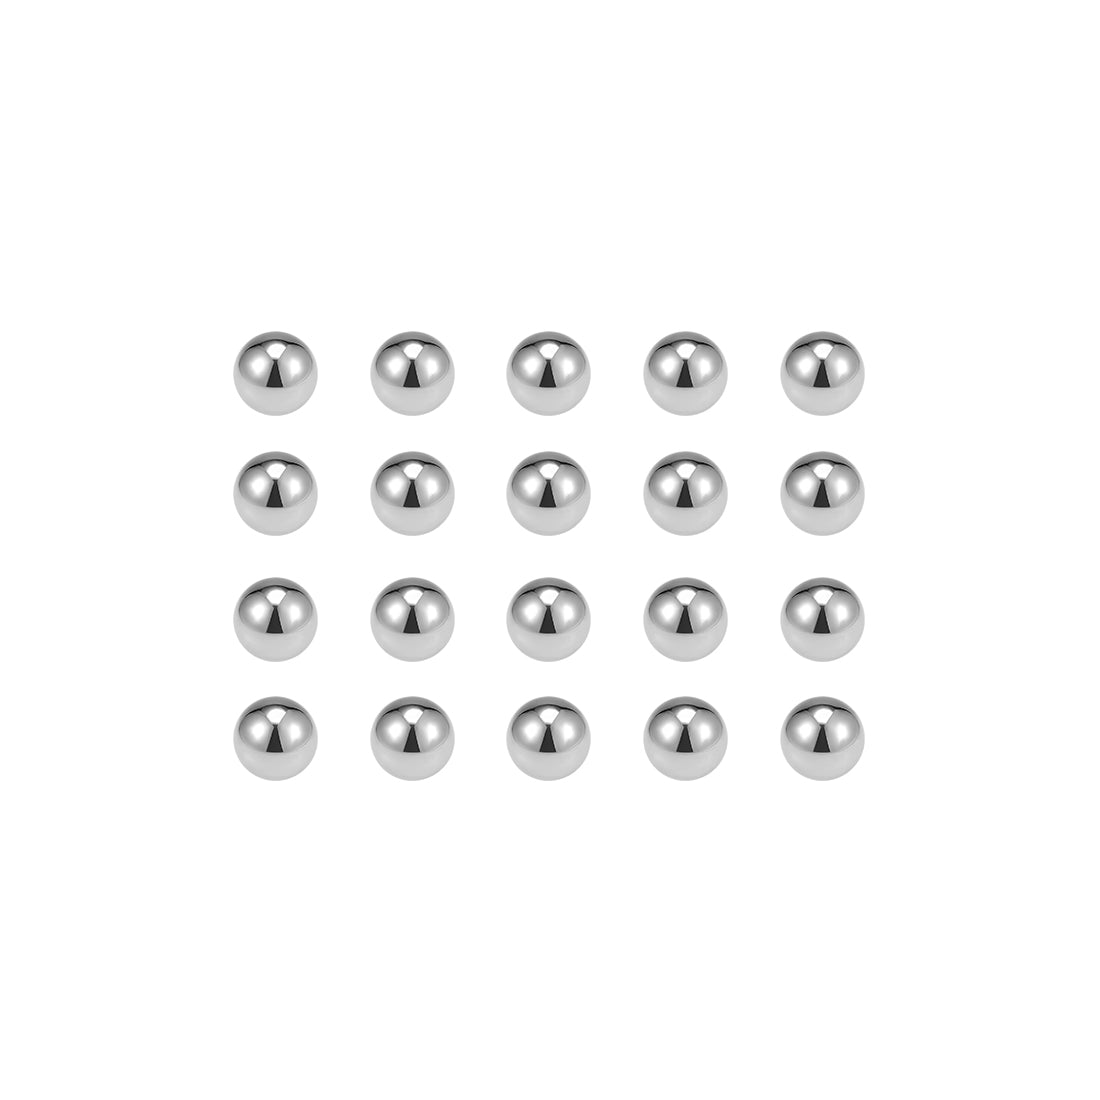 uxcell Uxcell Precision Balls 5/16" Solid Chrome Steel G25 for Ball Bearing Wheel 20pcs